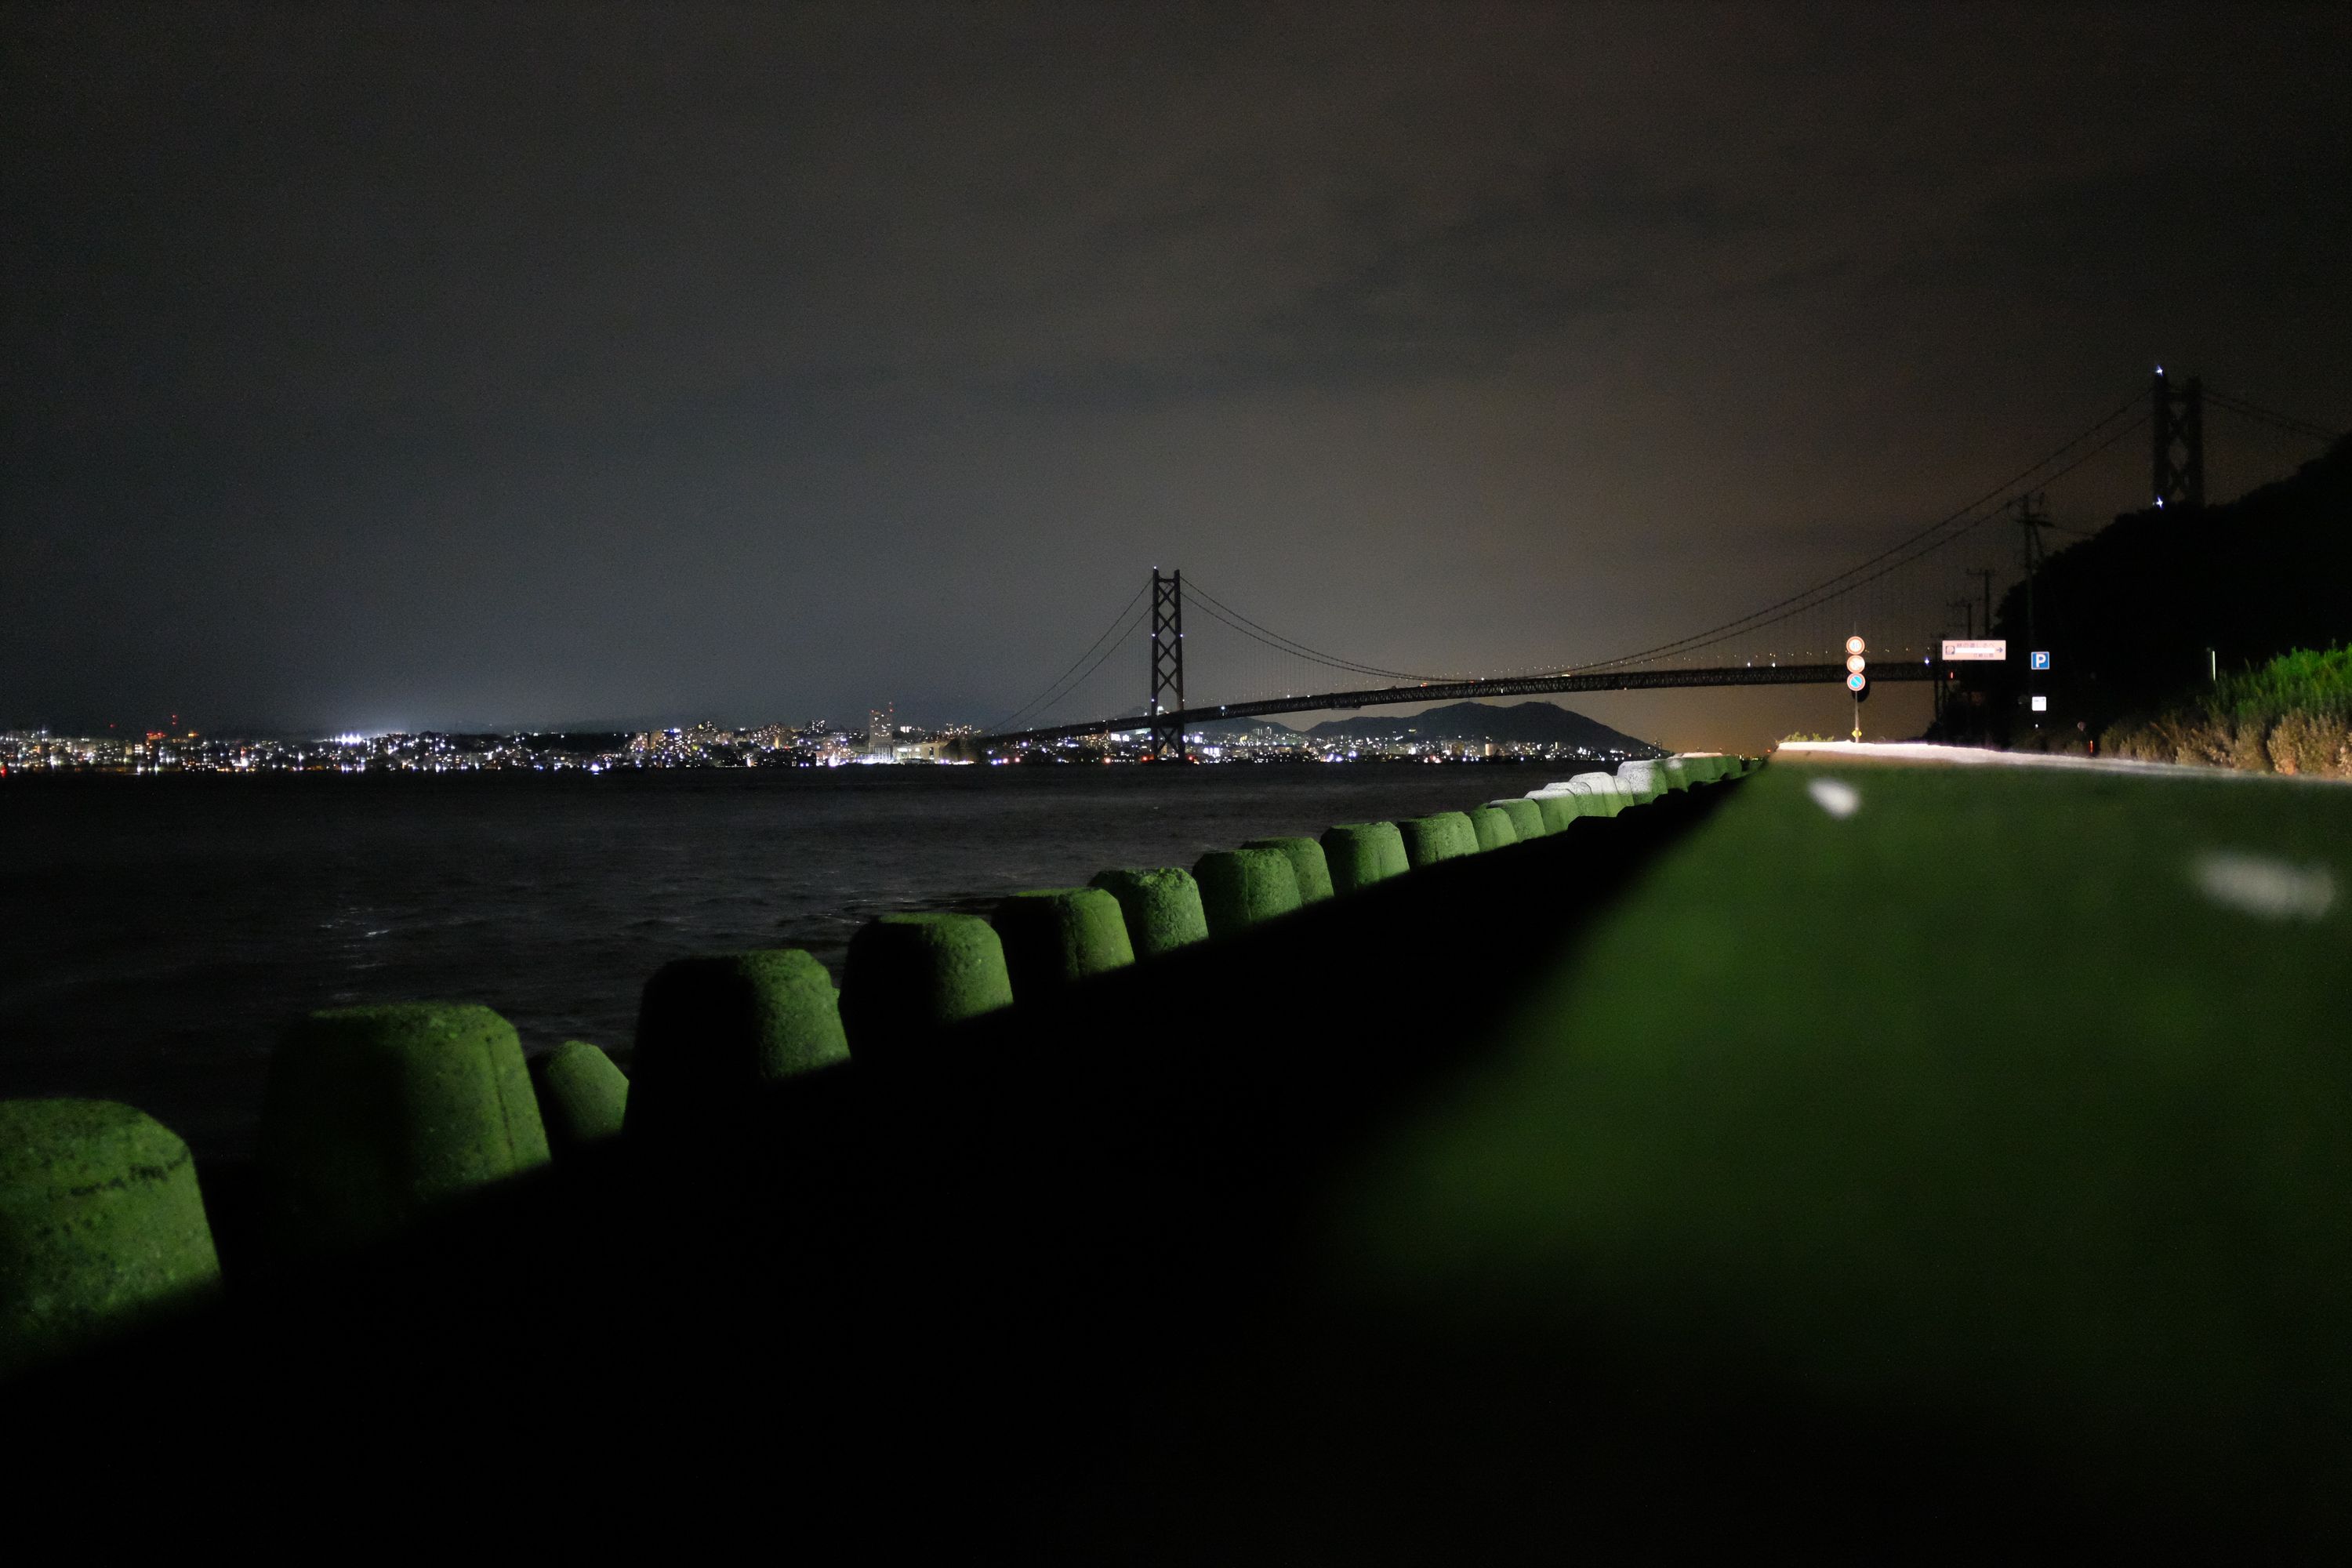 The world‘s longest suspension bridge, the Akashi Kaikyō, against a cloudy night sky lit by the lights of a city, Kōbe.